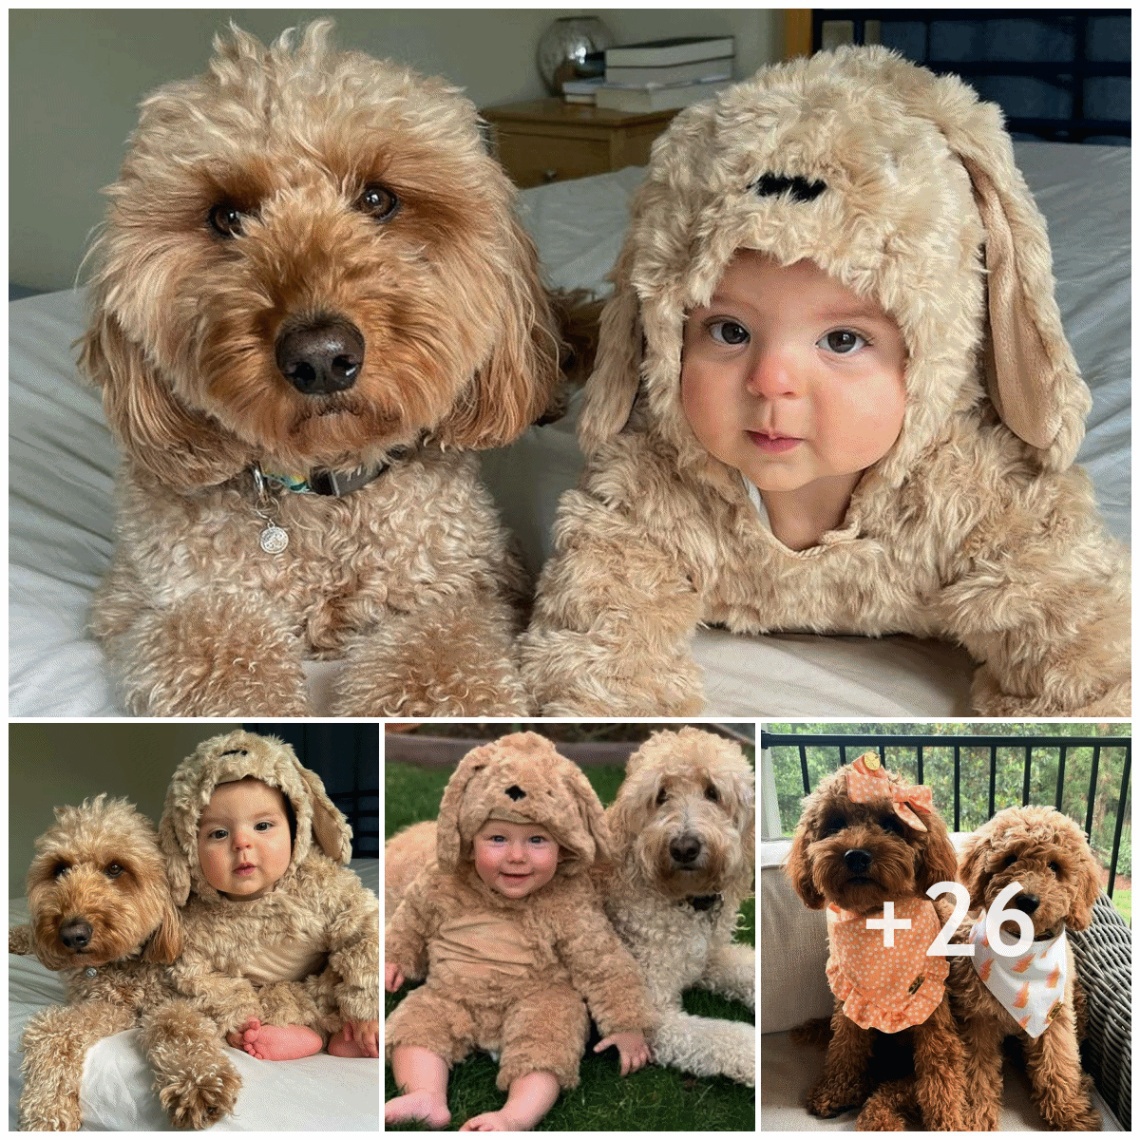 Perfect companions: dogs and babies; best friends with similar fur coats; growing up happily together.